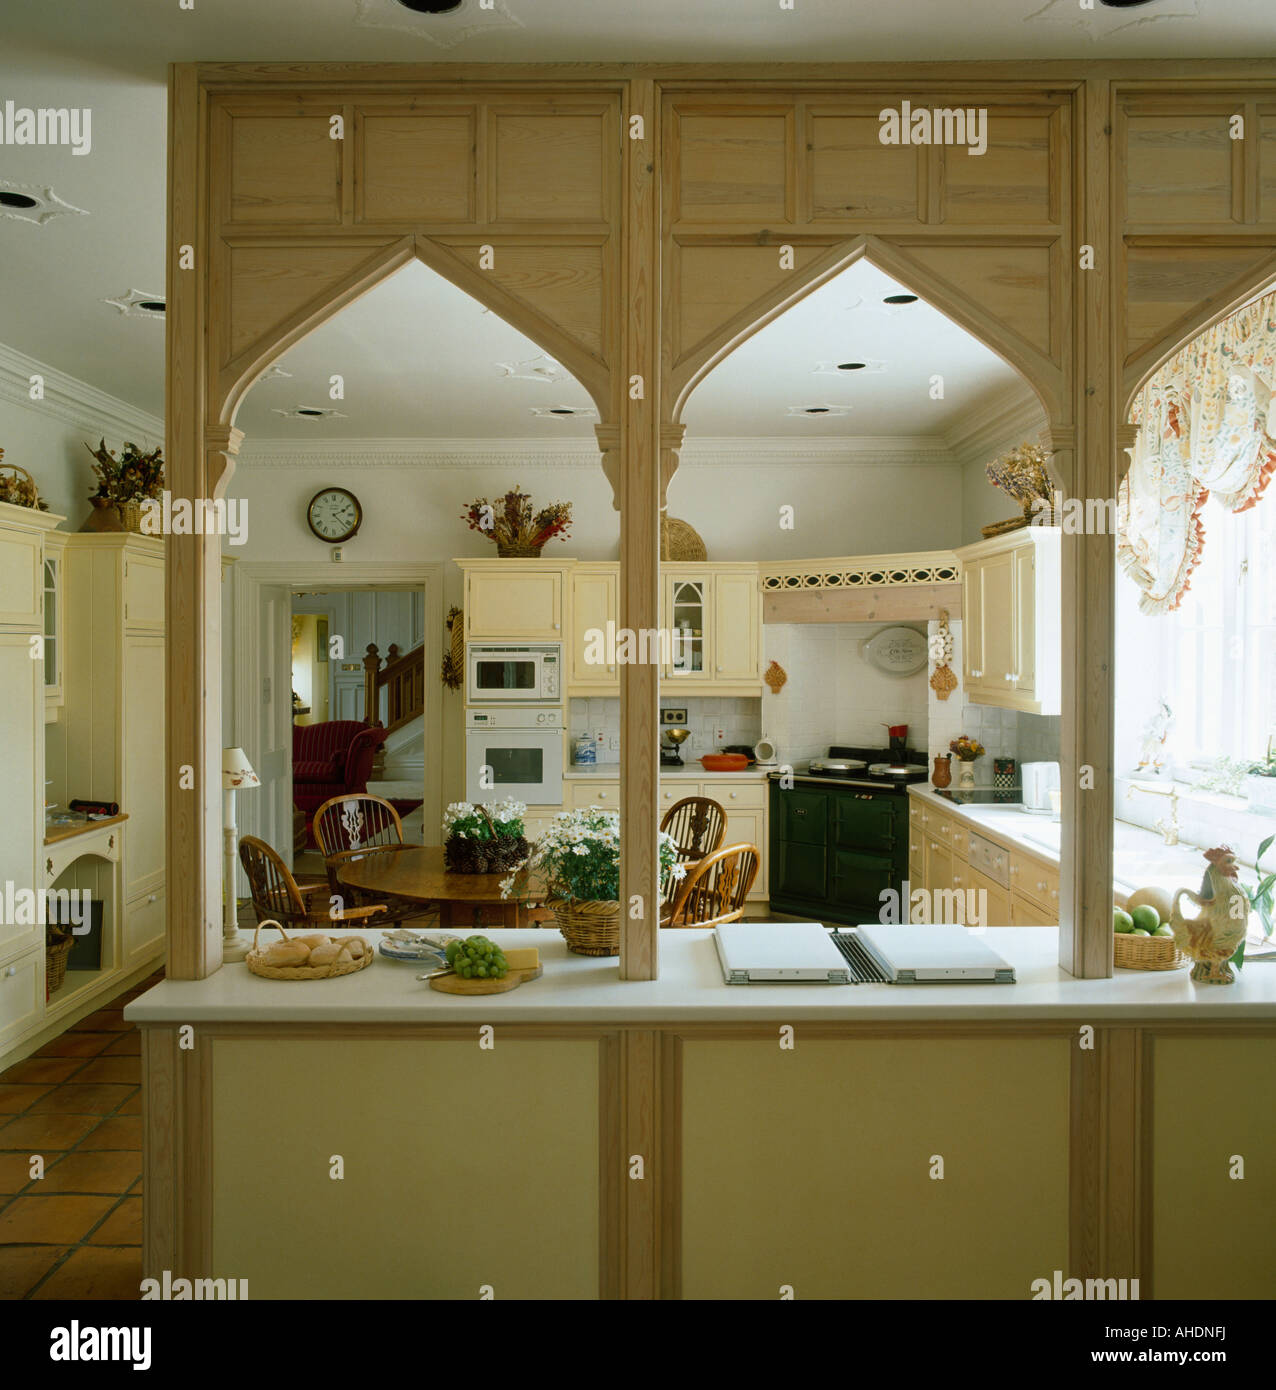 https://c8.alamy.com/comp/AHDNFJ/arched-wooden-gothic-style-divider-on-worktop-in-neutral-country-kitchen-AHDNFJ.jpg